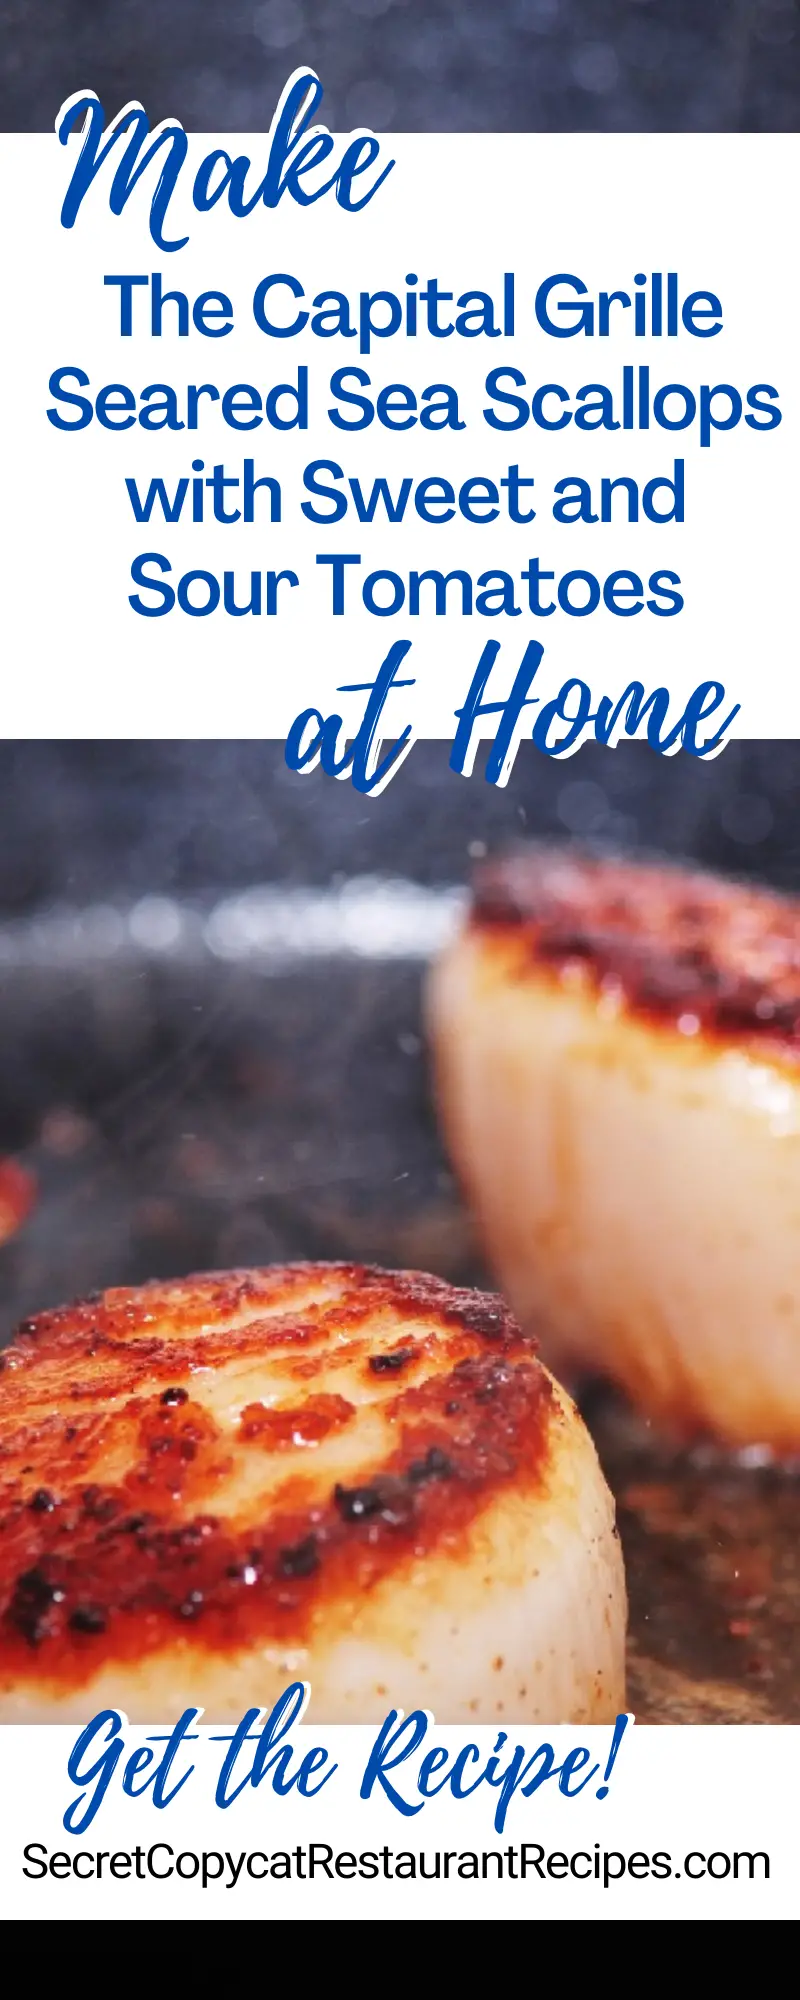 The Capital Grille Seared Sea Scallops with Sweet and Sour Tomatoes Recipe